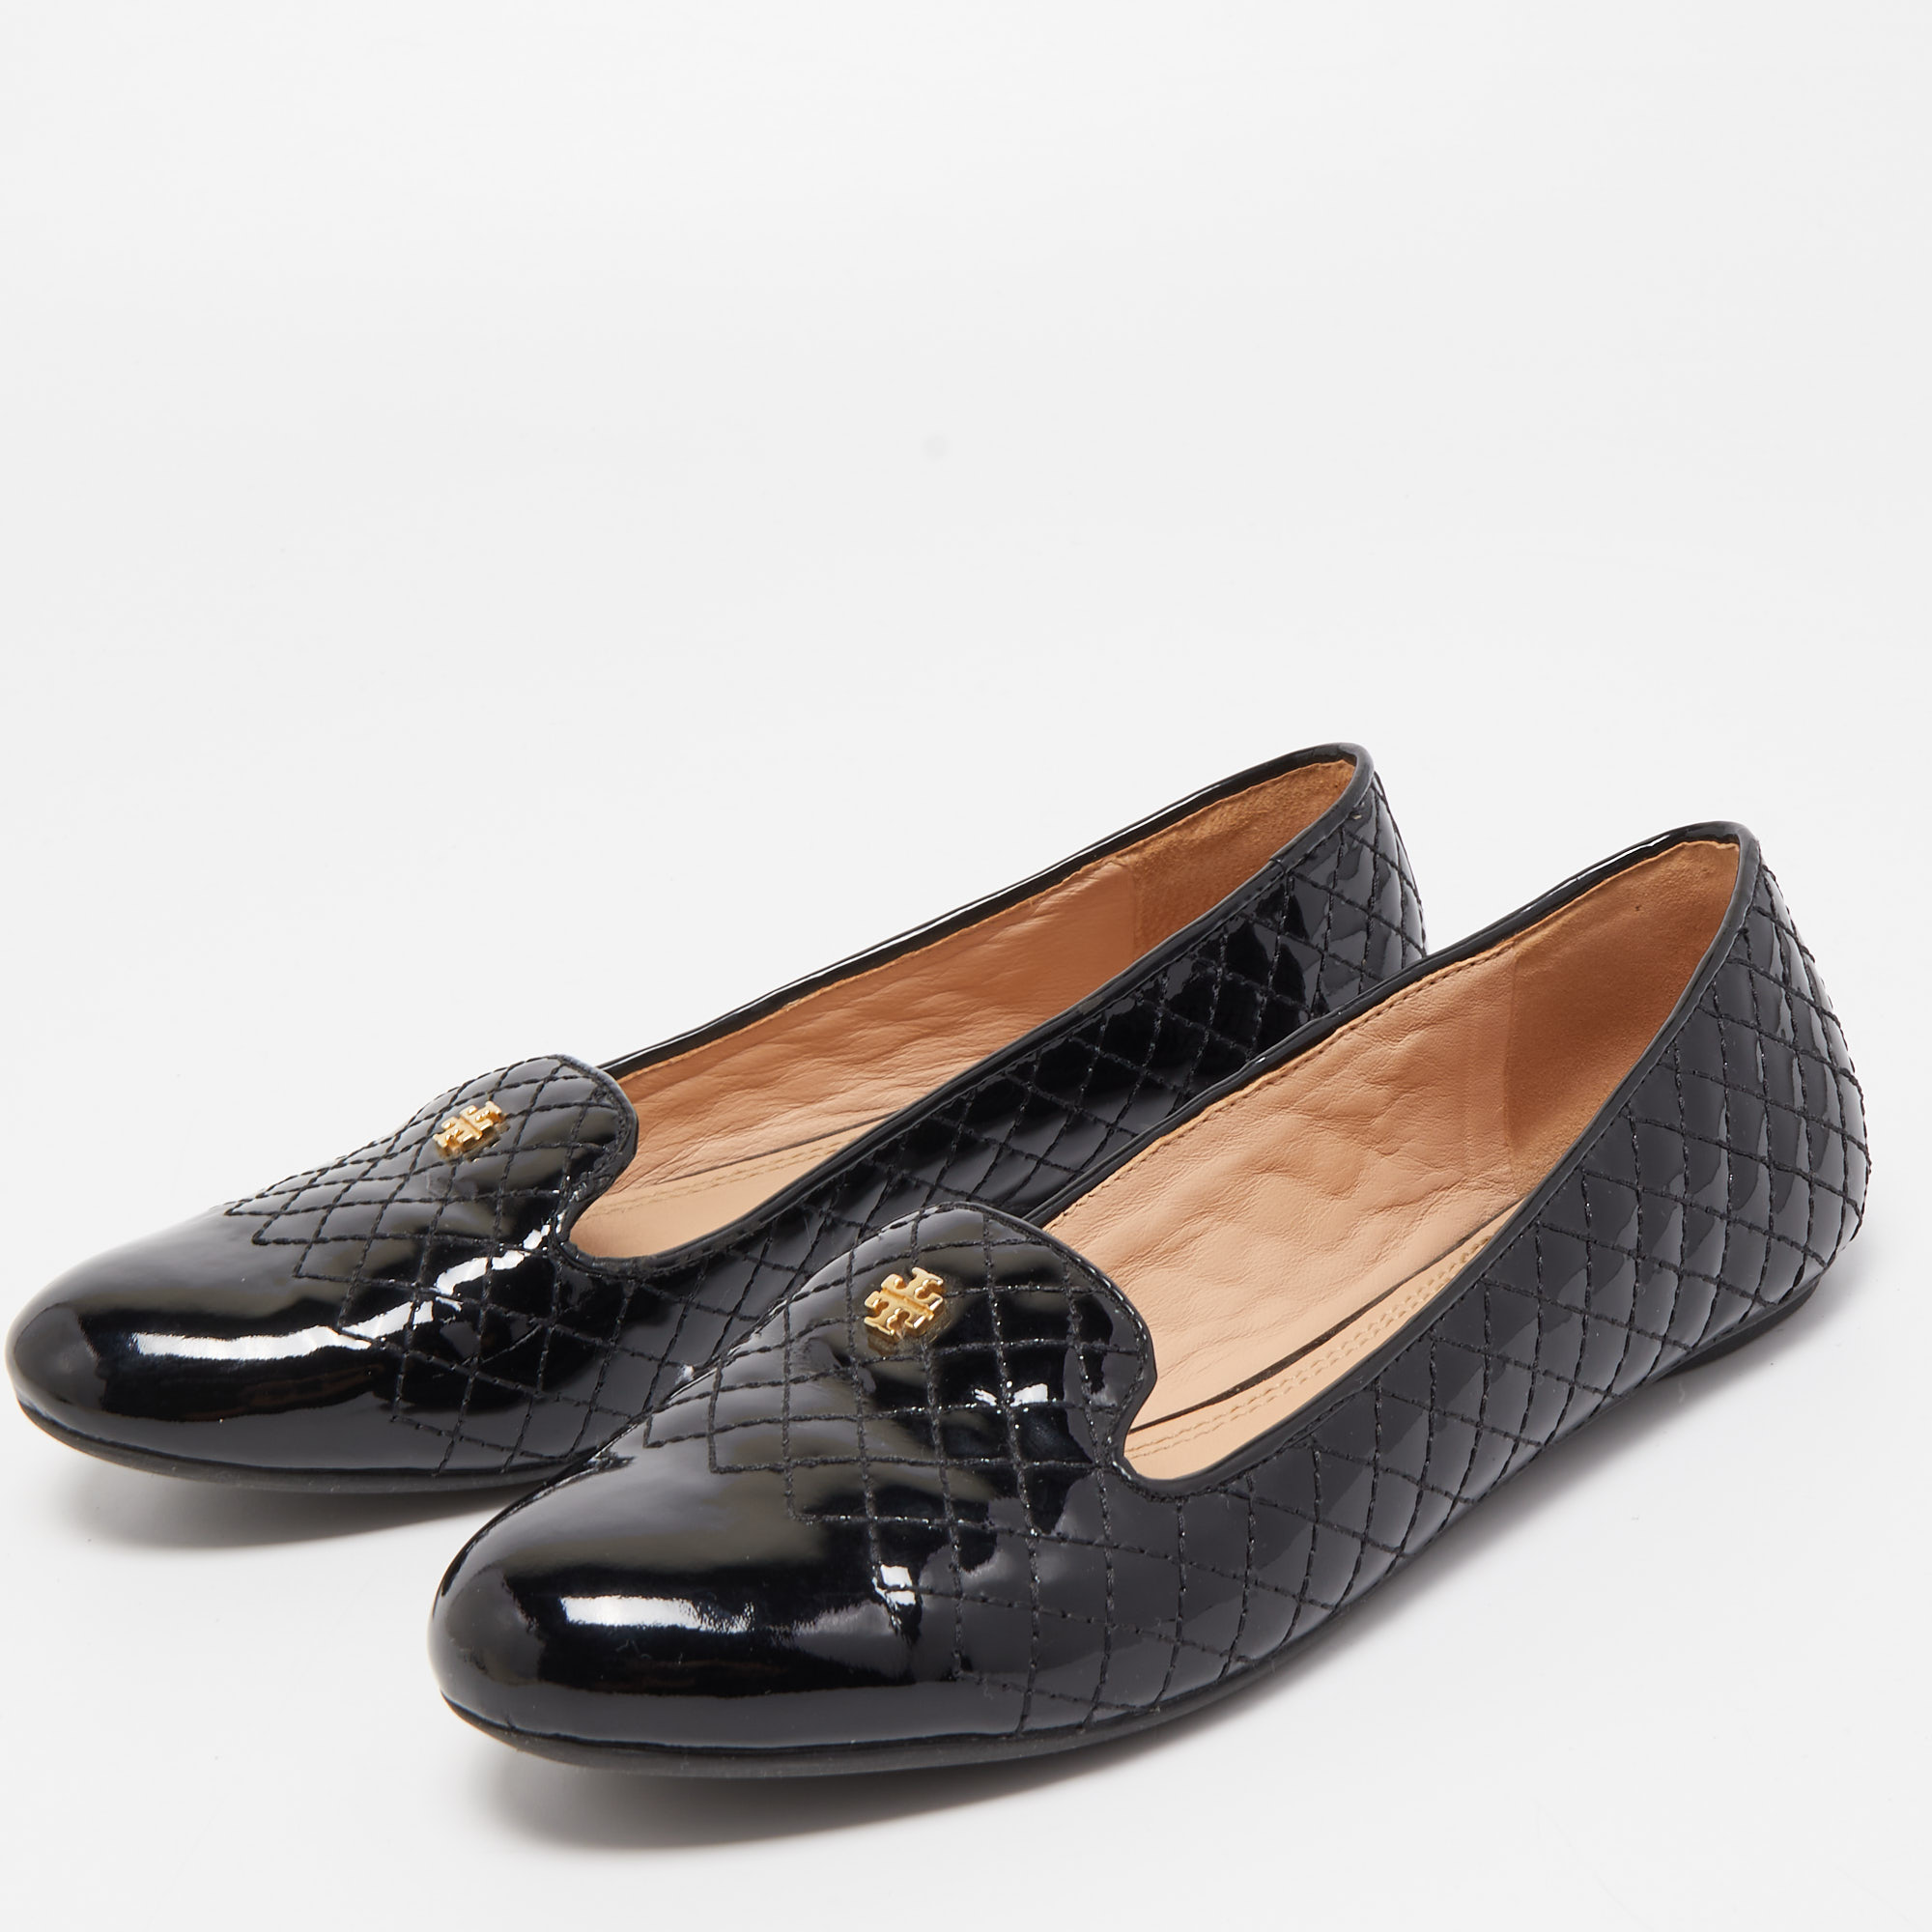 

Tory Burch Black Quilted Patent Leather Smoking Slippers Size